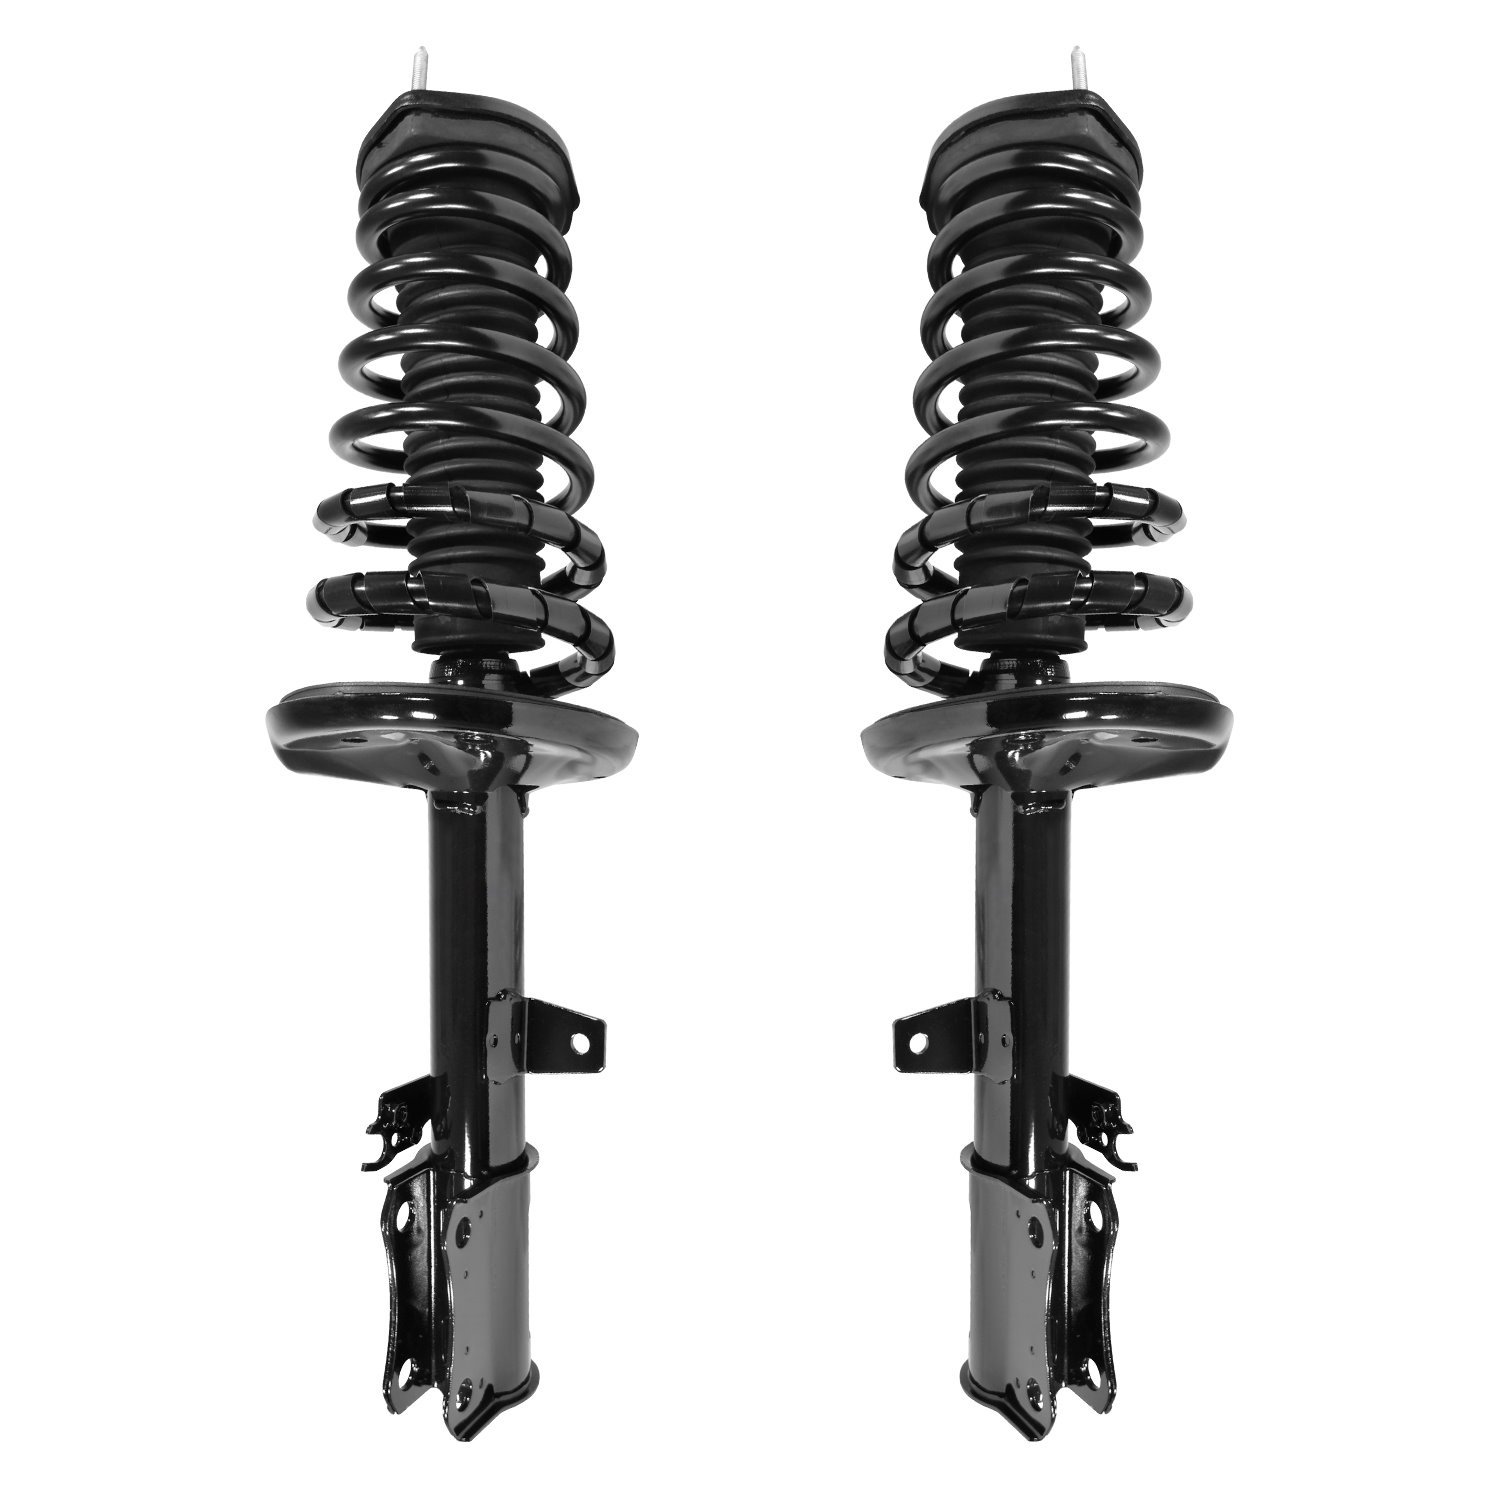 2-15031-15032-001 Suspension Strut & Coil Spring Assembly Set Fits Select Toyota Camry, Toyota Solara